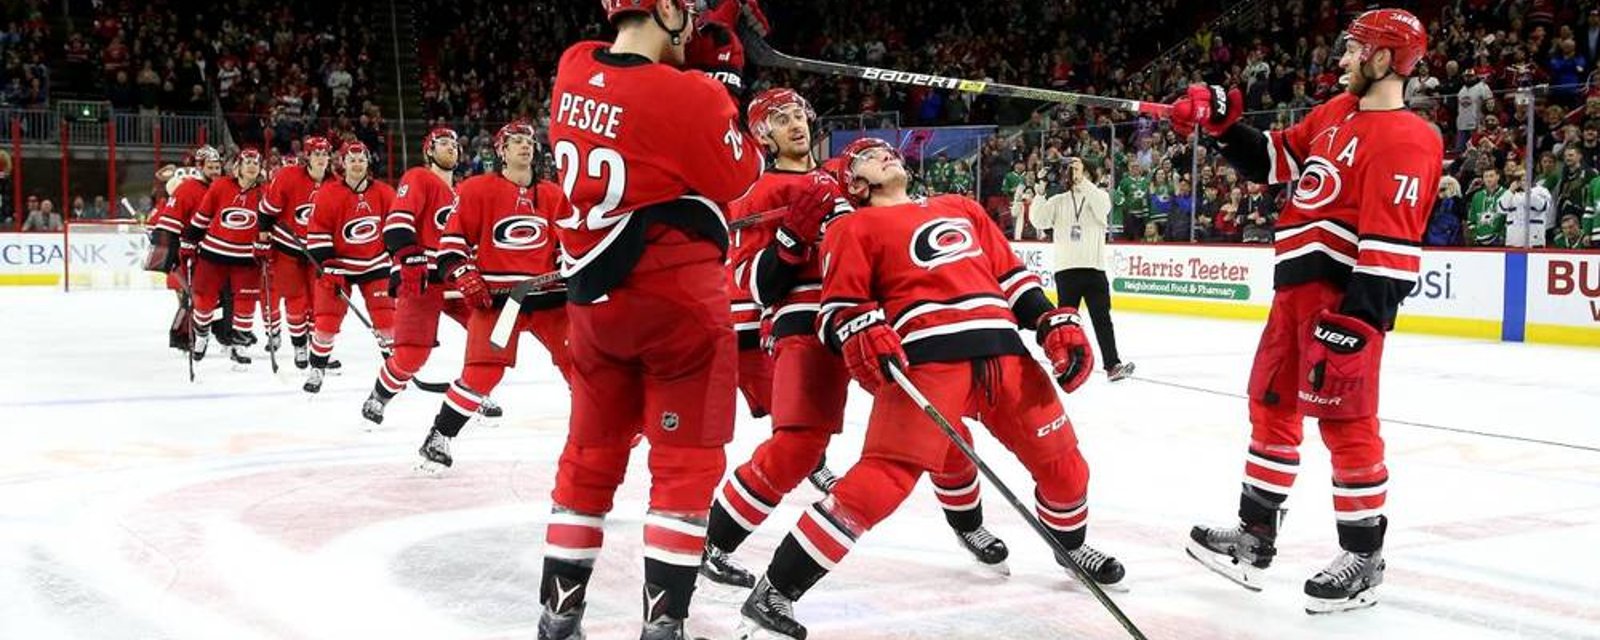 The Hurricanes are done being jerks! 